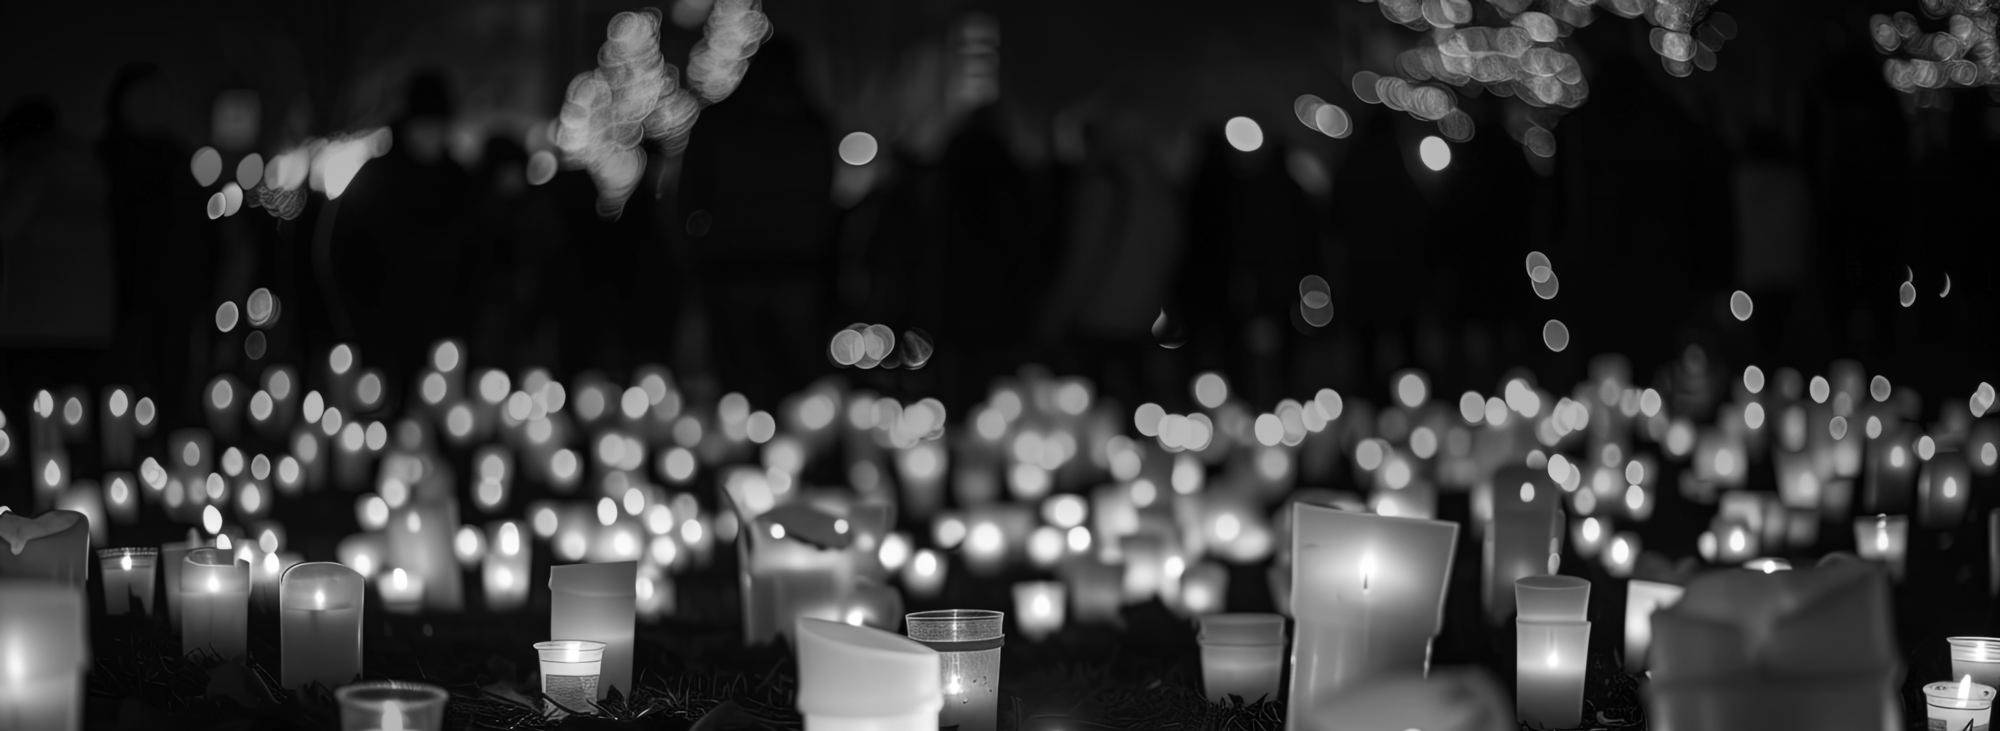 Black and white photo of memorial candles burning in a field